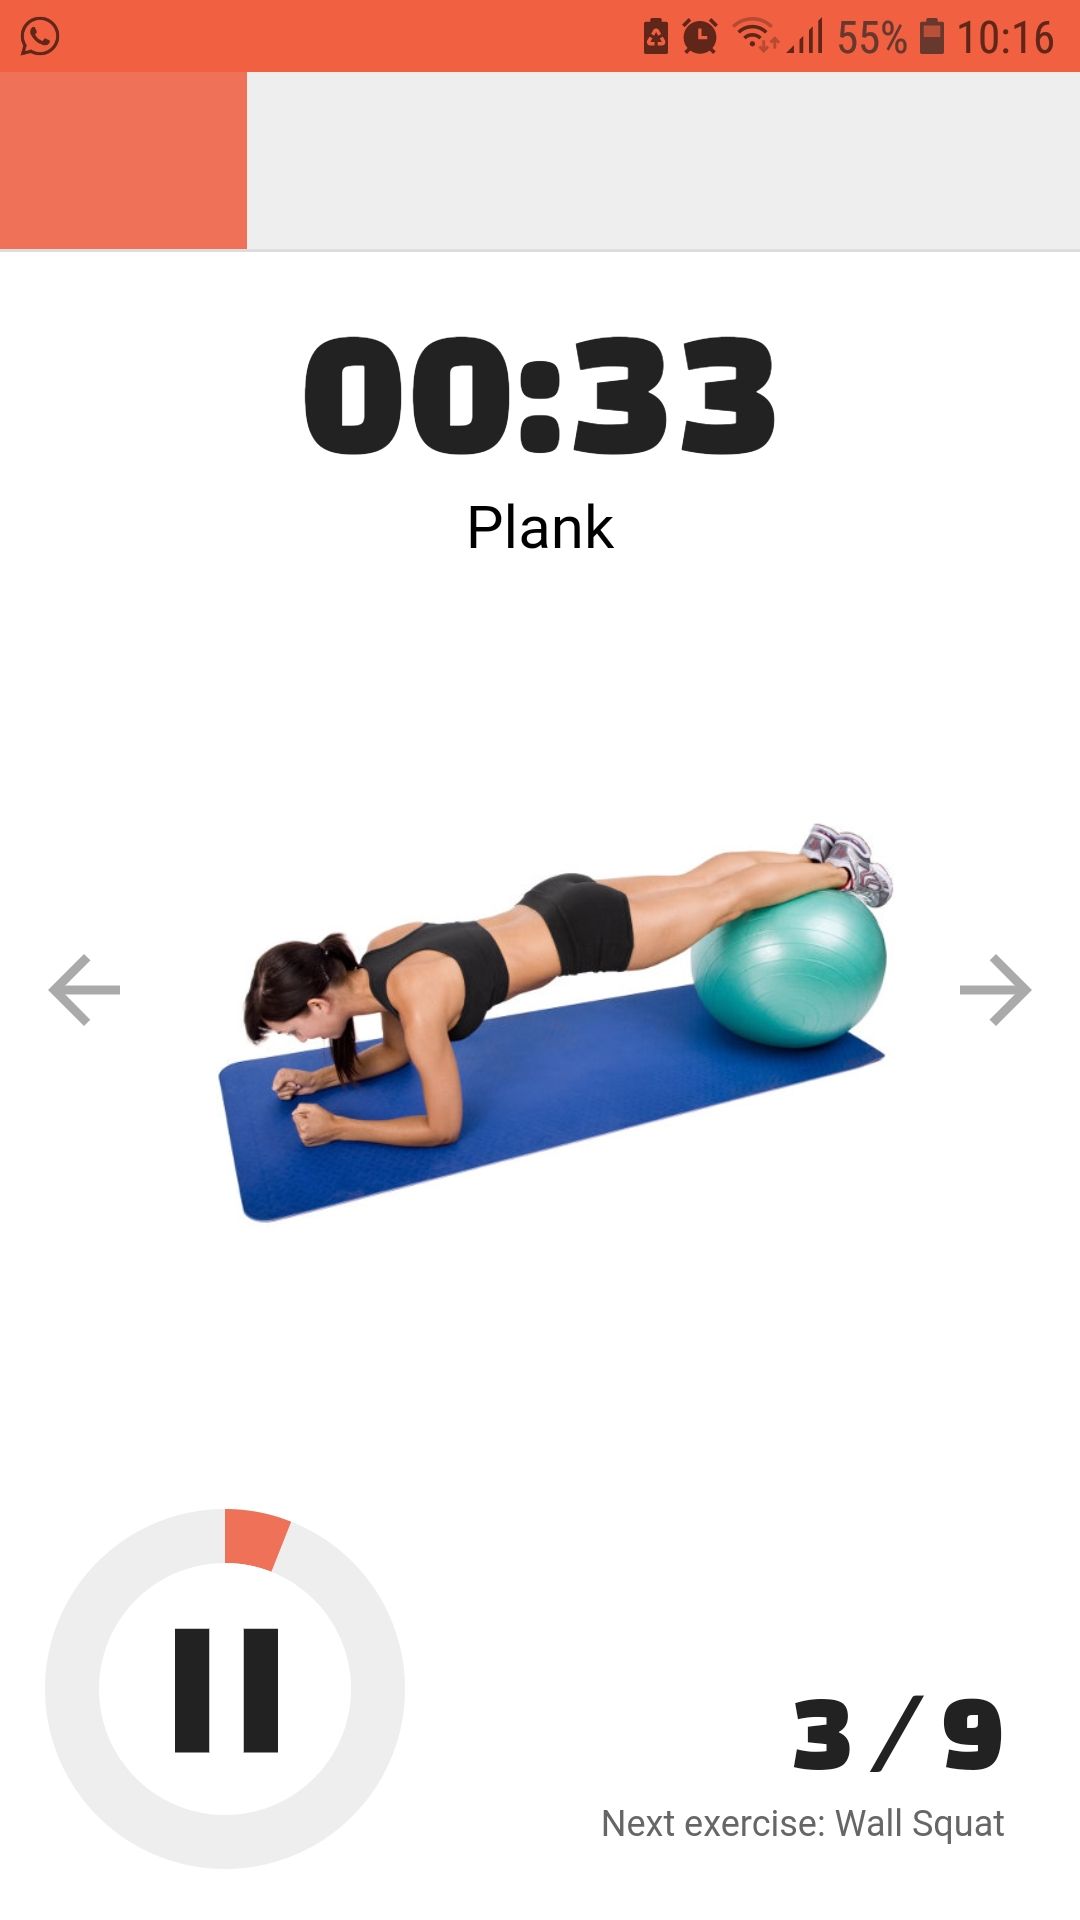 Stay Fit With Samantha Stability Ball Exercises mobile fitness app plank